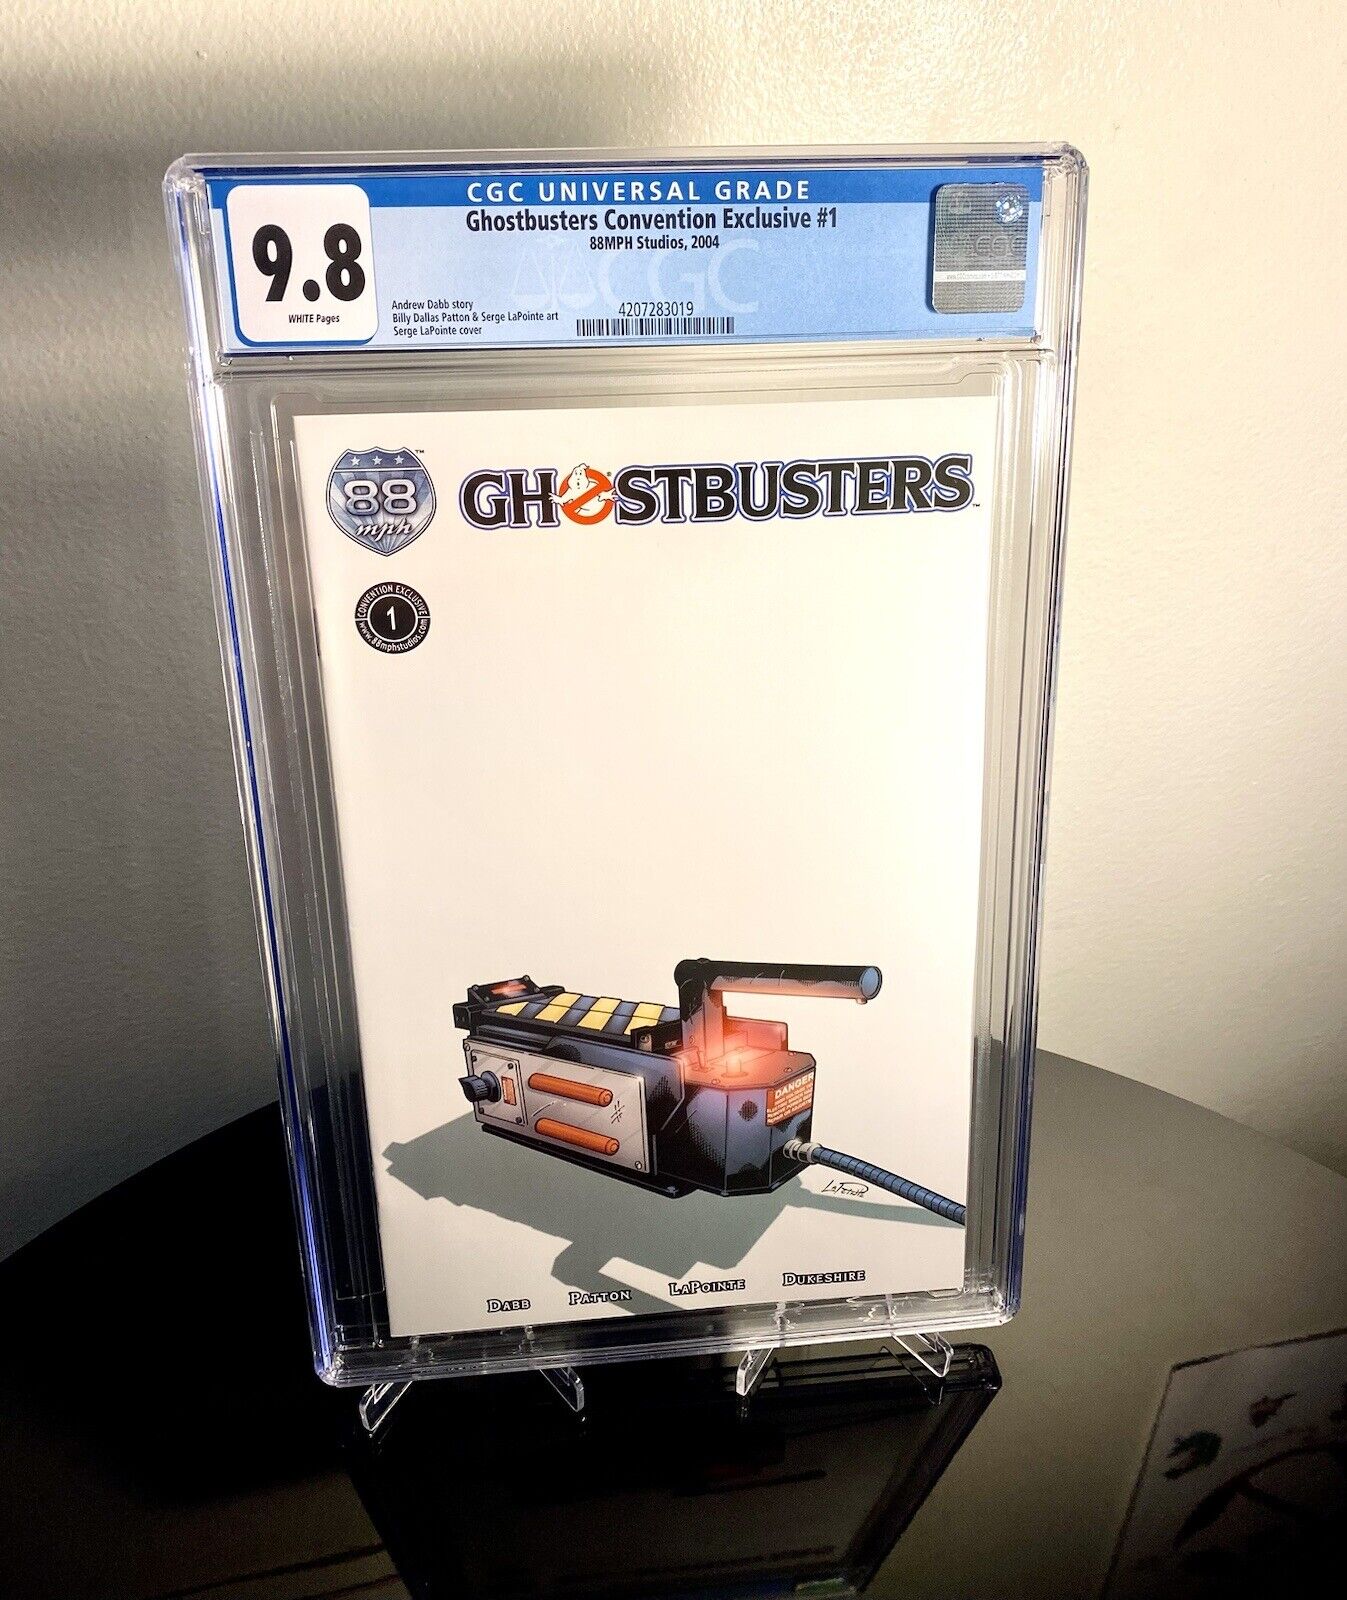 Ghostbusters #1 CGC 9.8 88MPH 2004 SDCC Exclusive POP 7 Limited Printing Of 1000